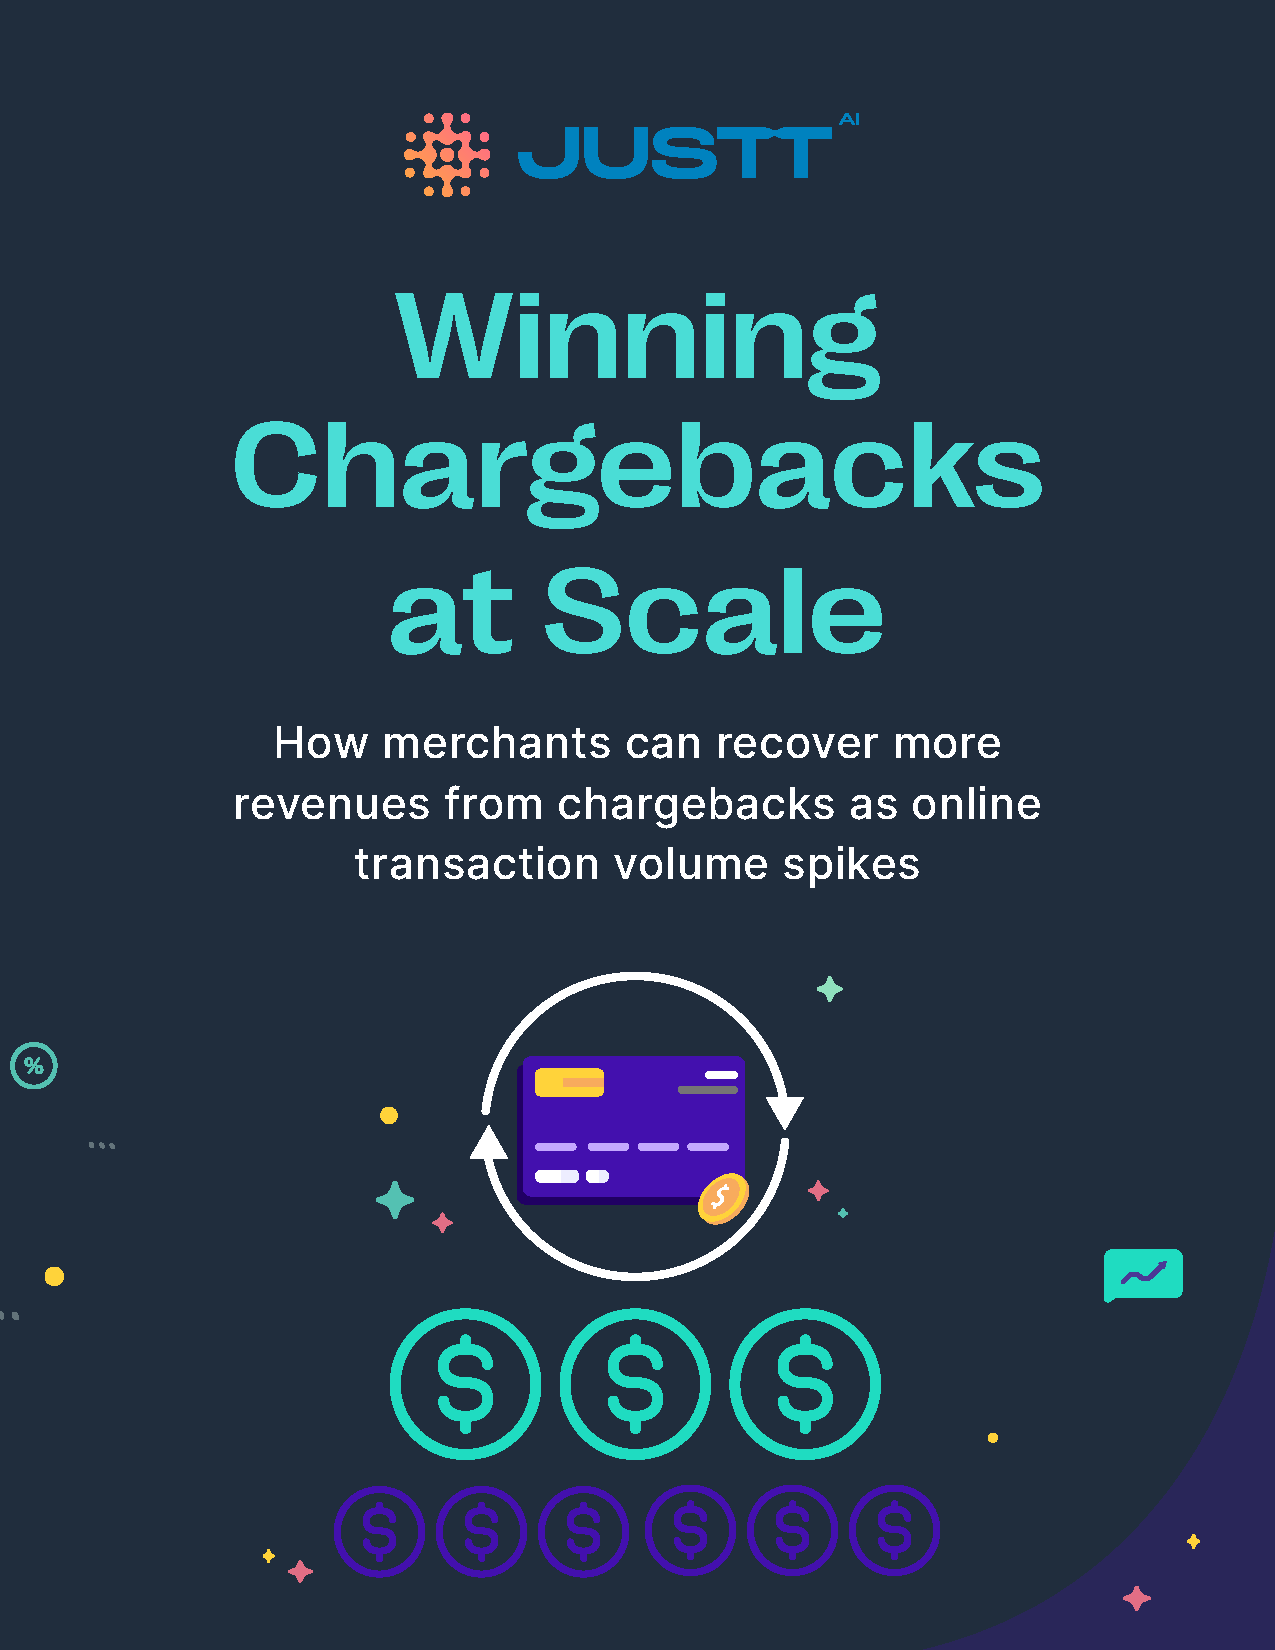 Maximize Your Chargeback Win Rate: 5 Tips From the Experts